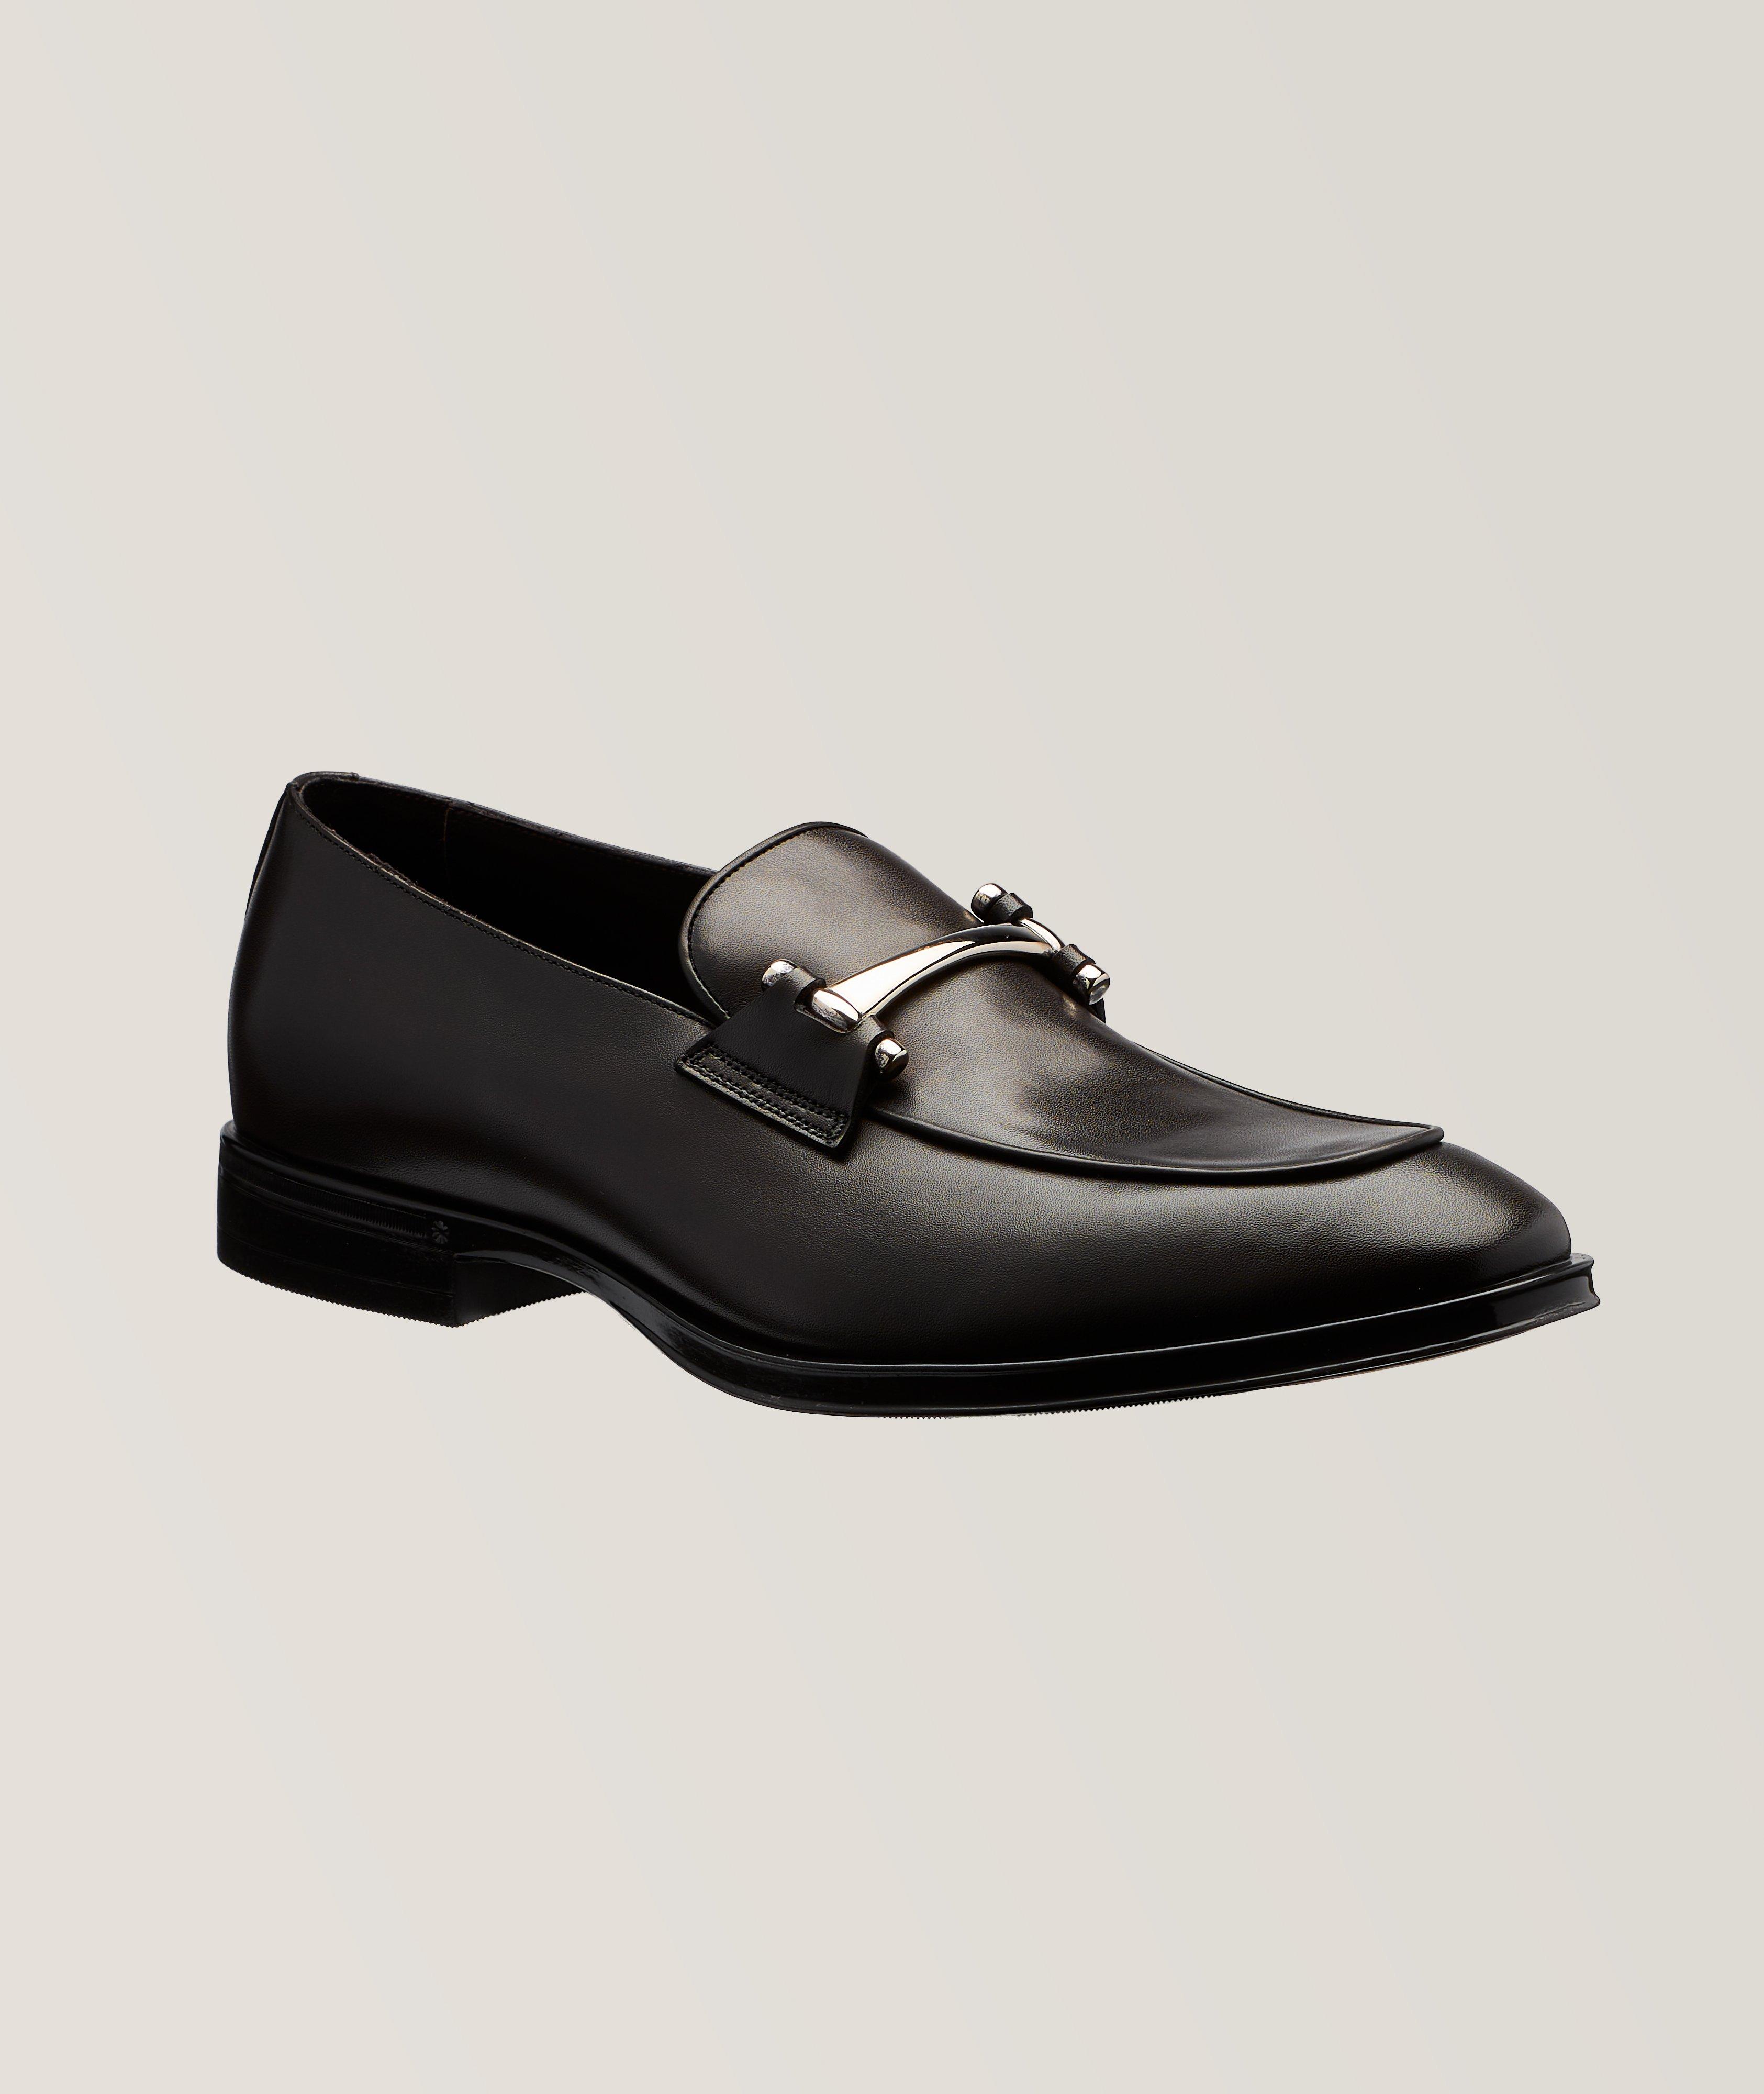 Canali Horsebit Leather Loafers